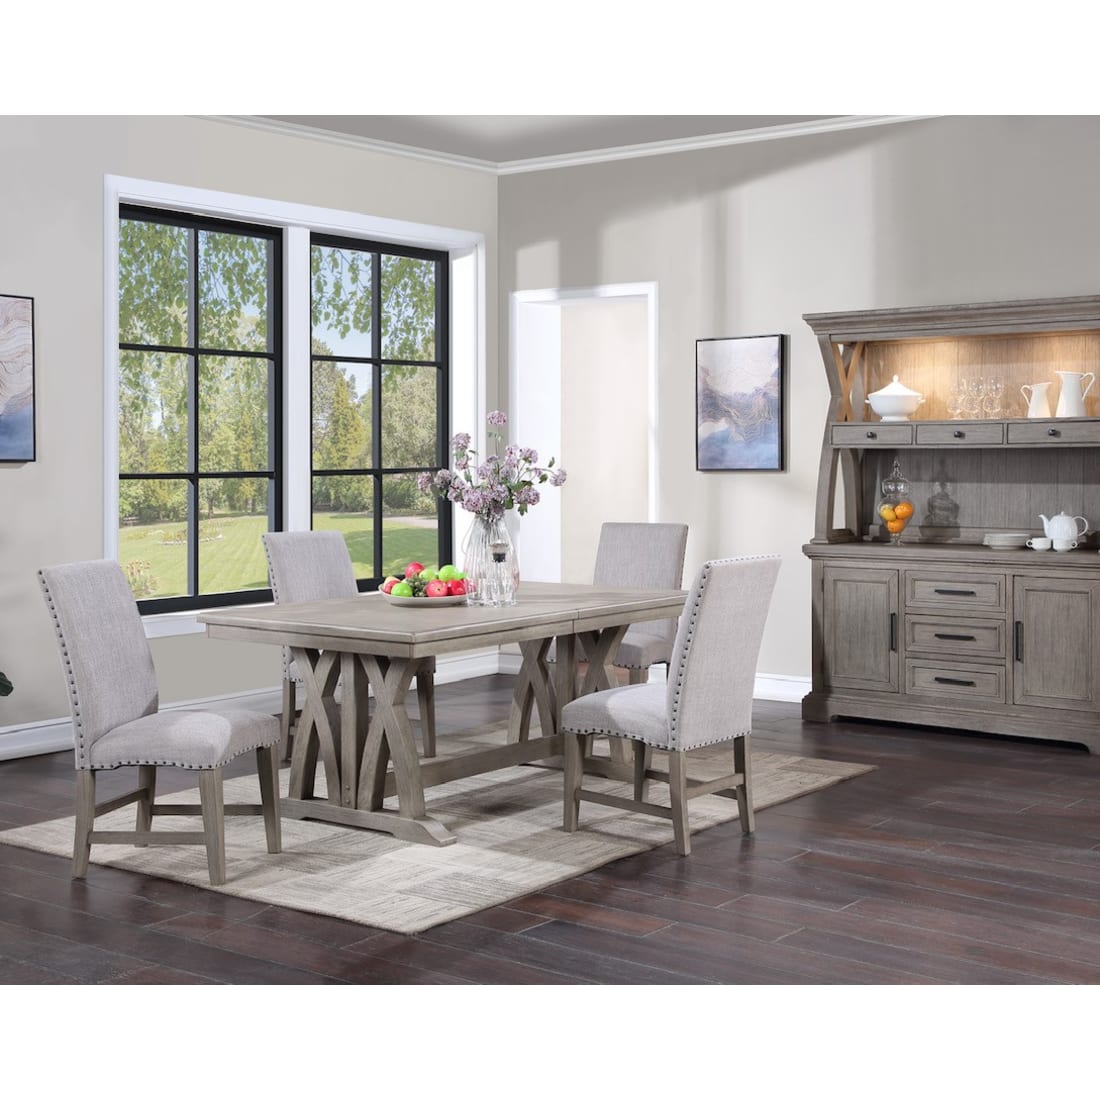 DEVON GREY 5PC DINING SET - TABLE & 4 CHAIRS